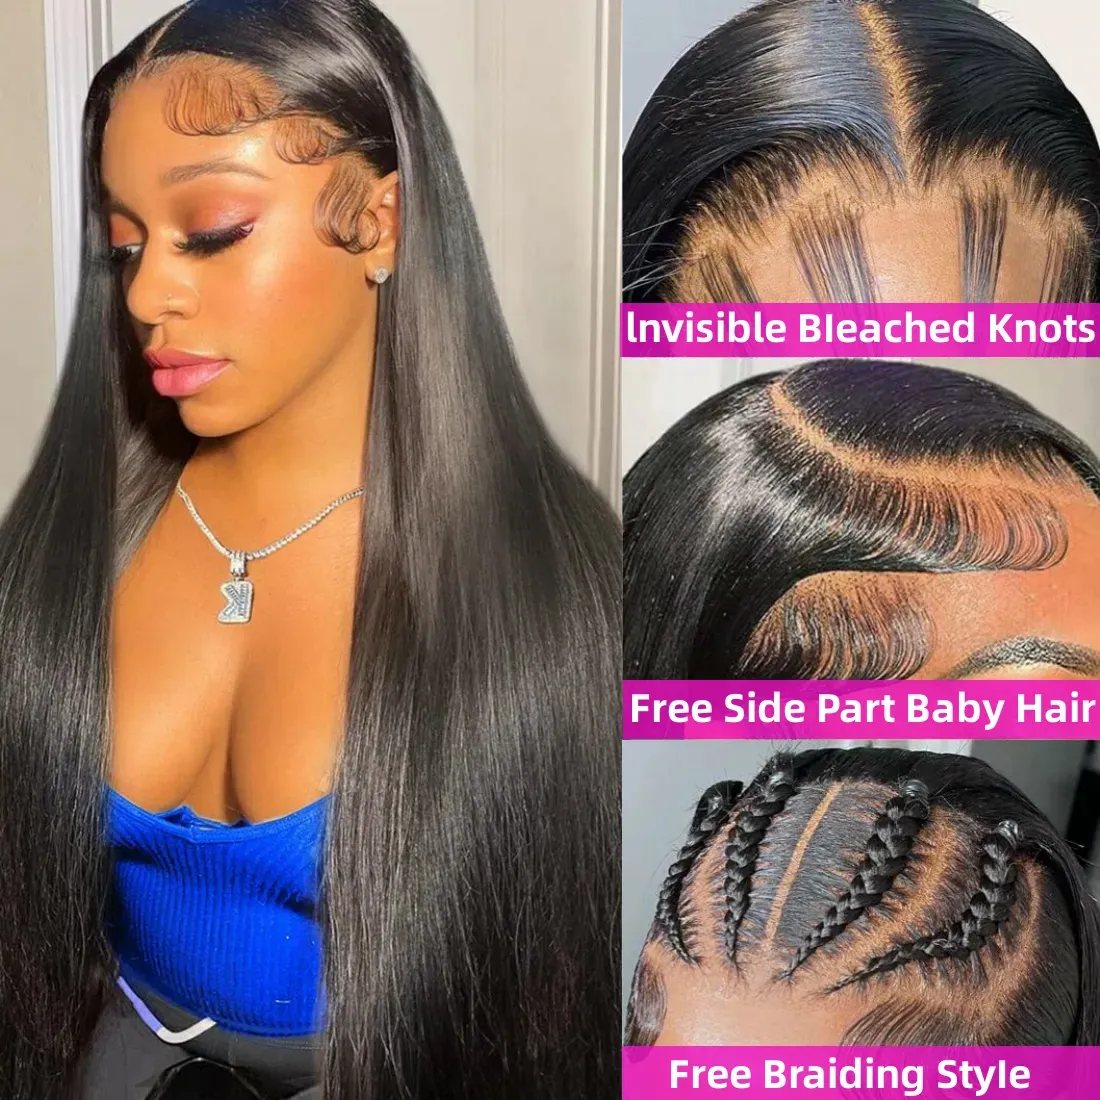 250 Density Wig Human Hair Ready To Wear HD 13x4 13x6 Hd Lace Front Wigs 30 40 Inch Straight Lace Frontal Wig Lace Closure Wigs Synthetic Wigs Hair Wigs Hair Products